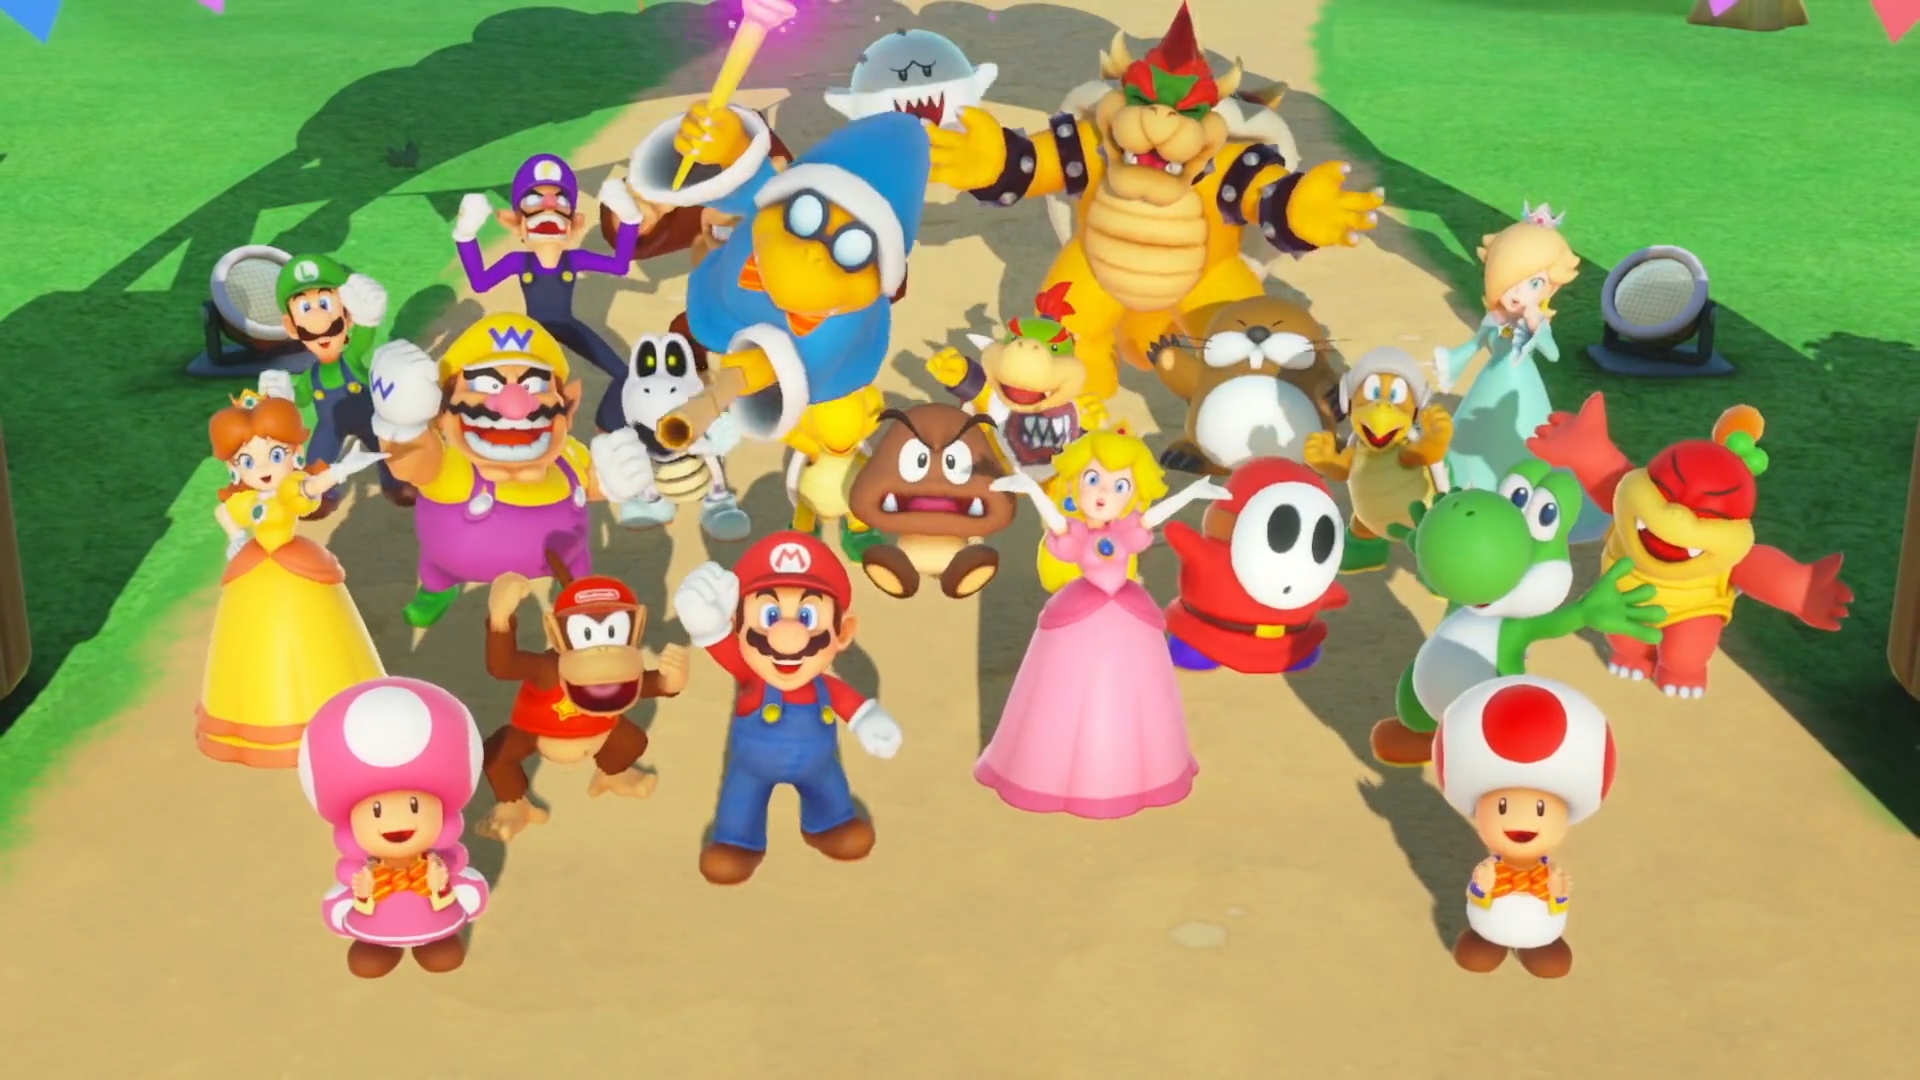 How to unlock characters in the Mario Party?